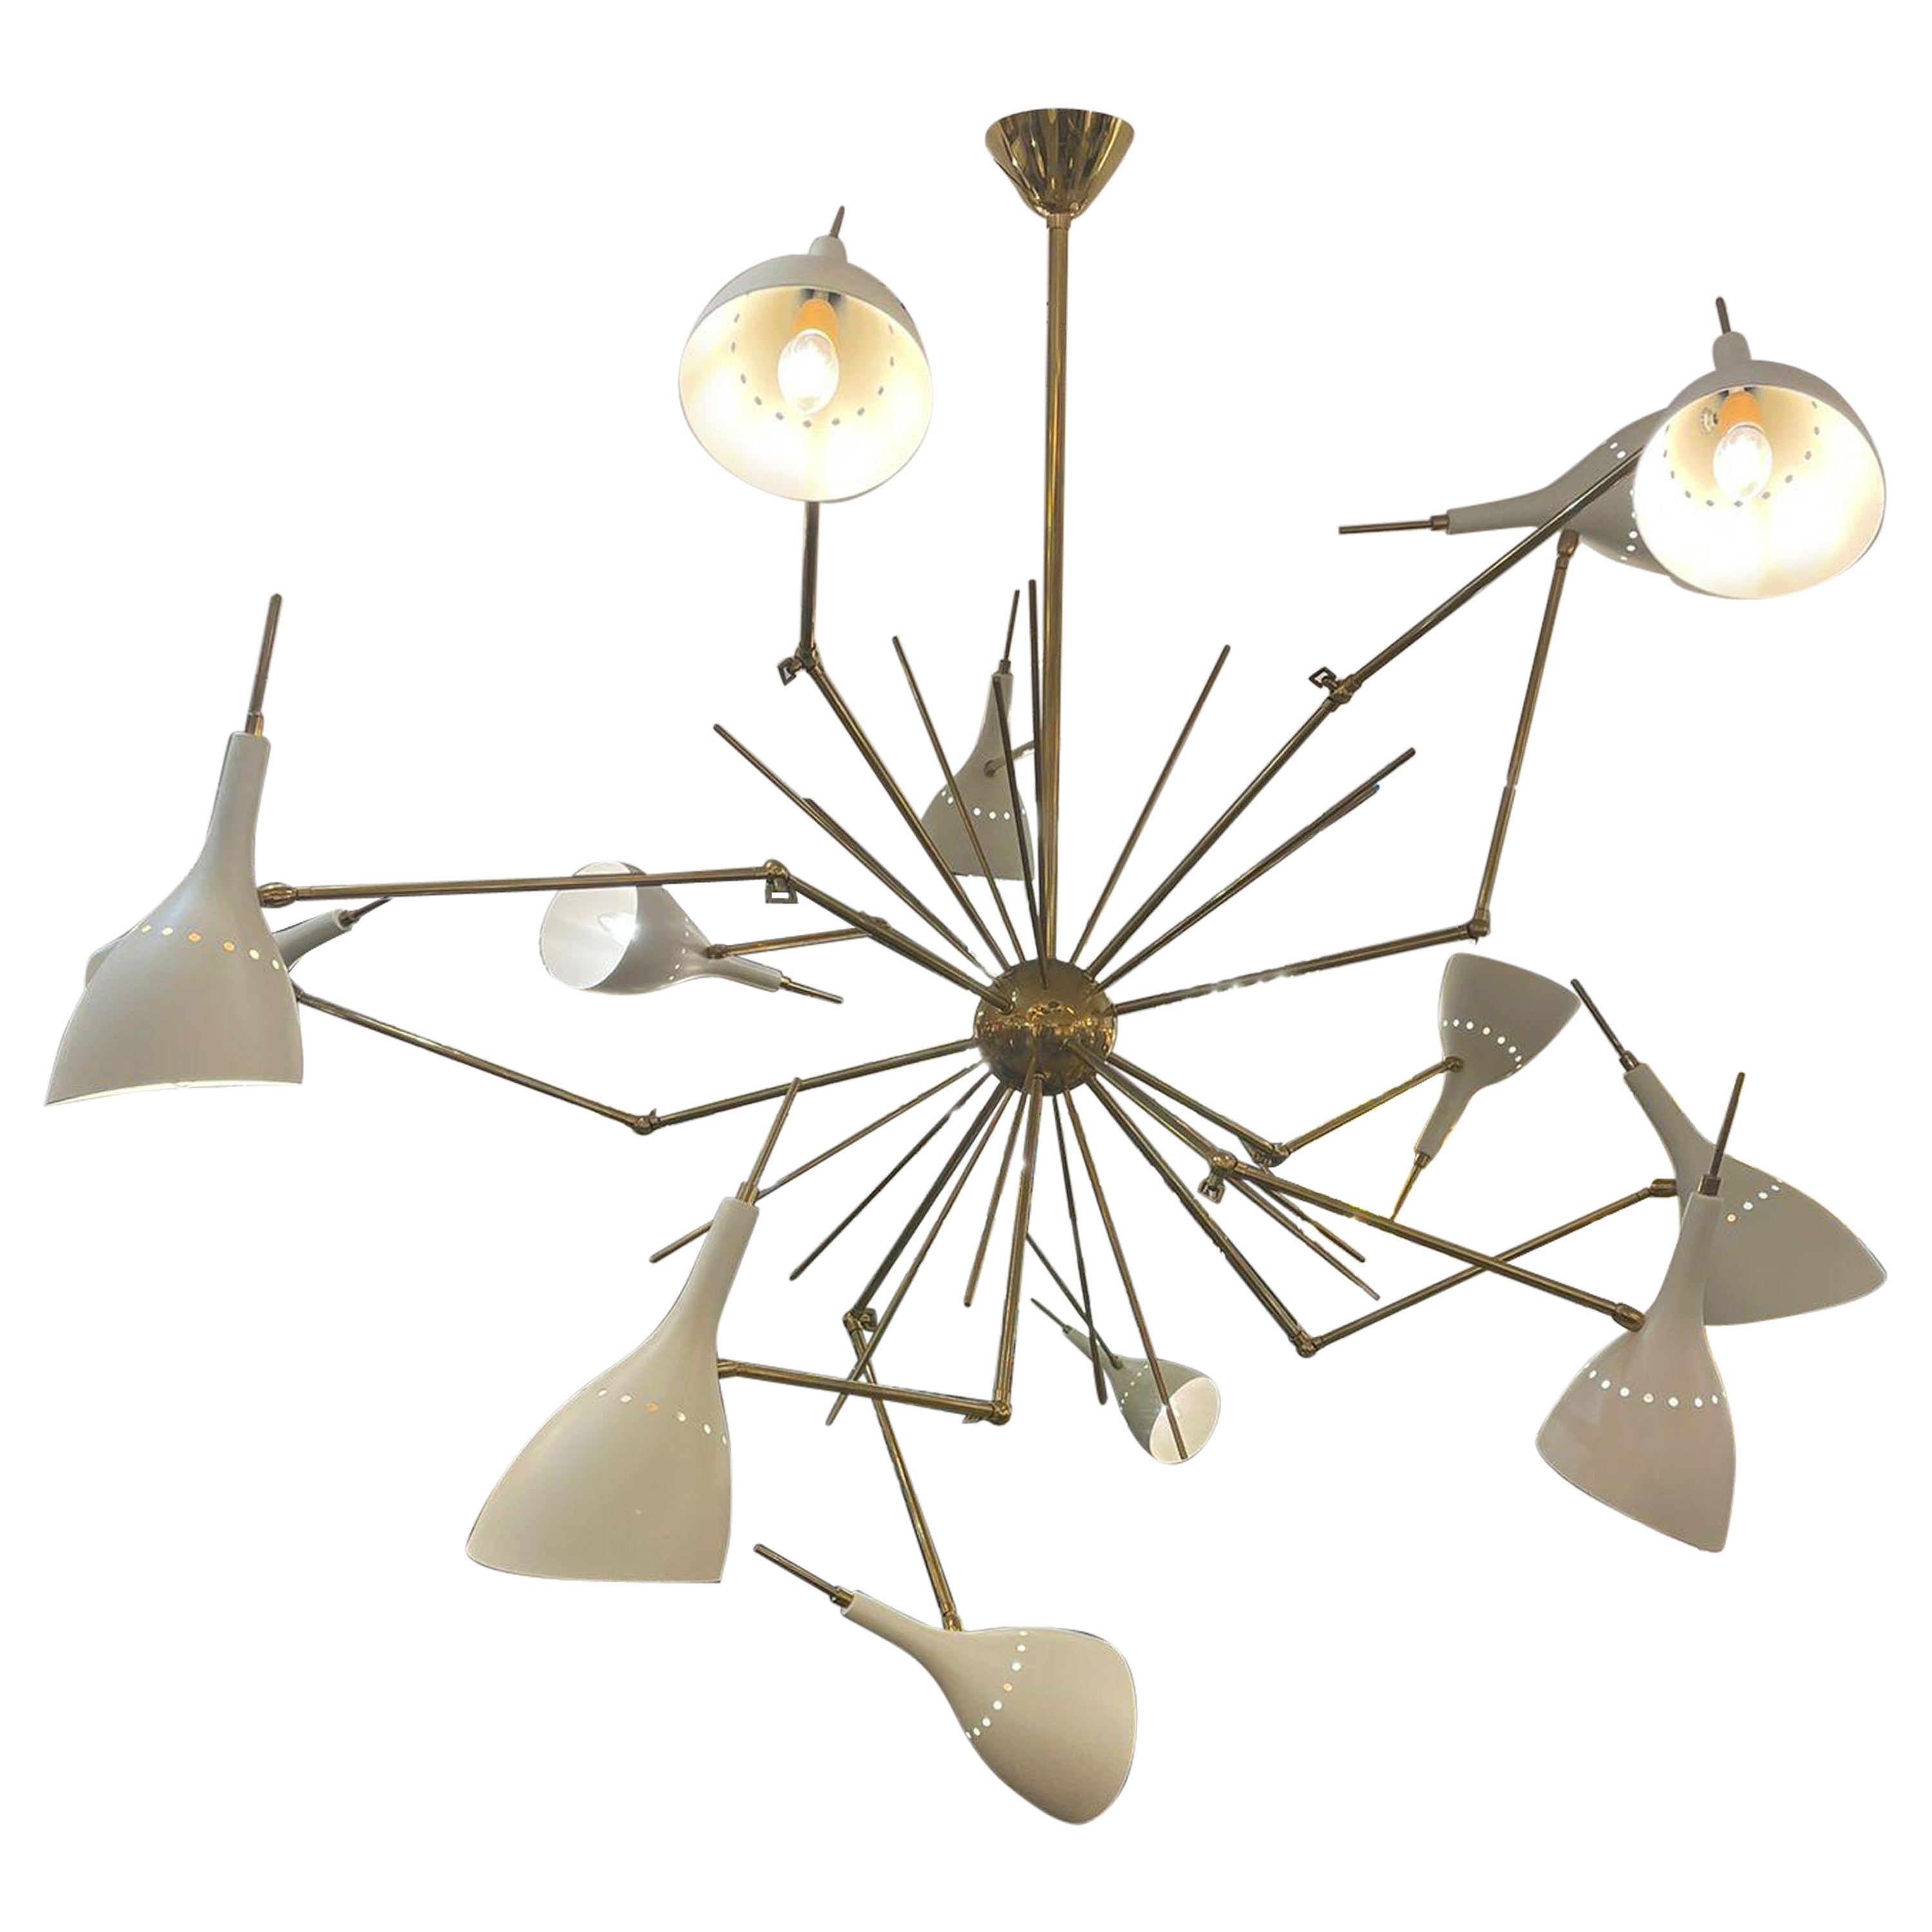 Brass Chandelier "Spider" with 12 Ivory Shades, Italy 1970s